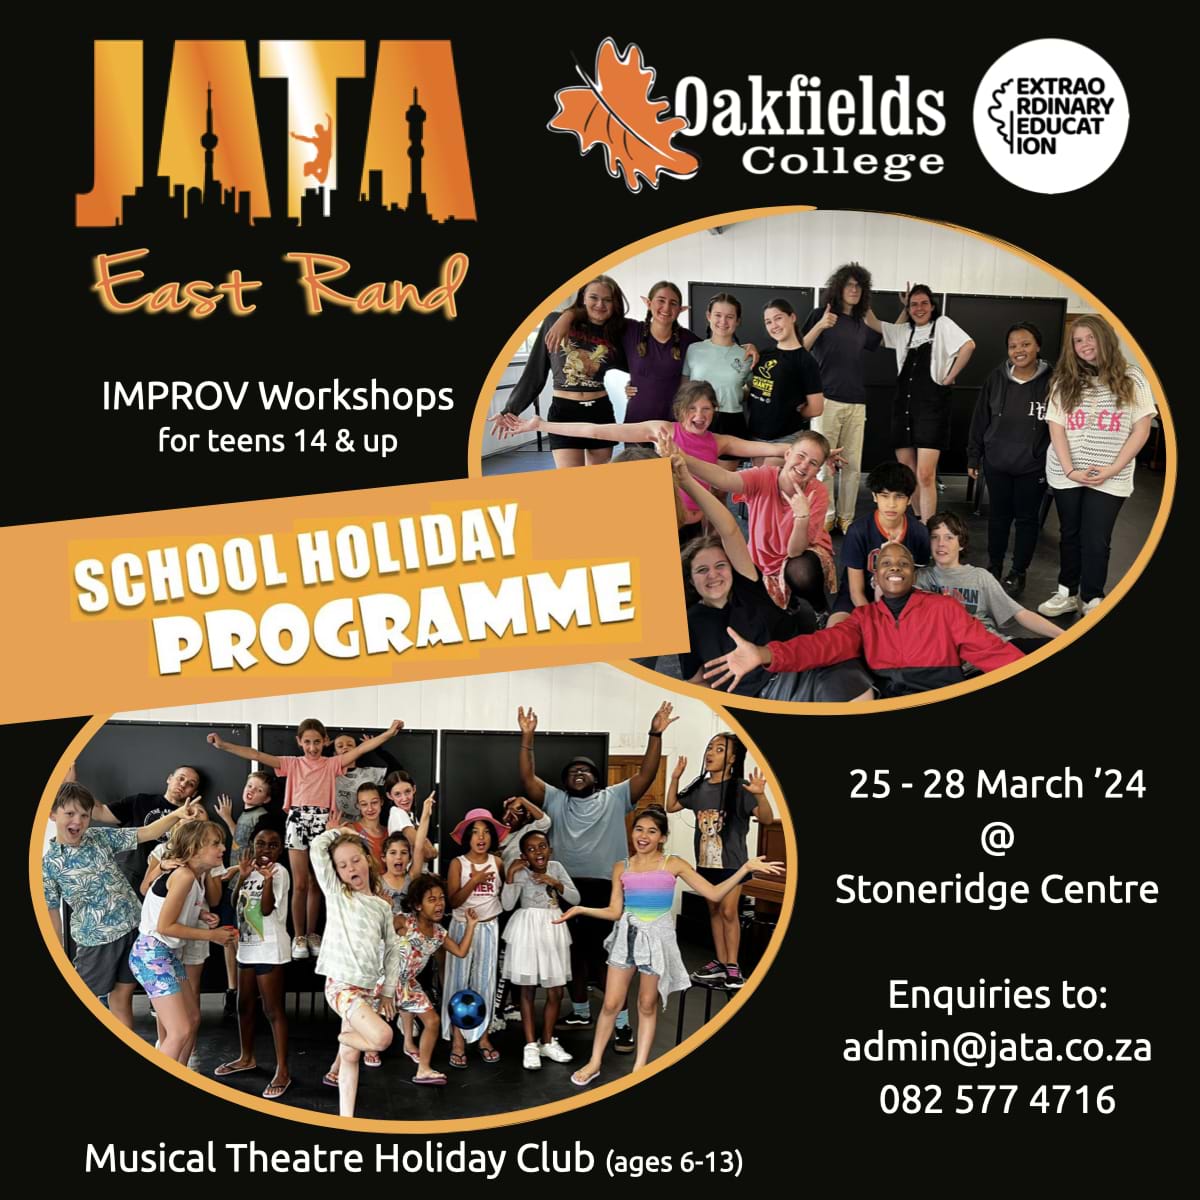 Oakfields College School Holiday Programme